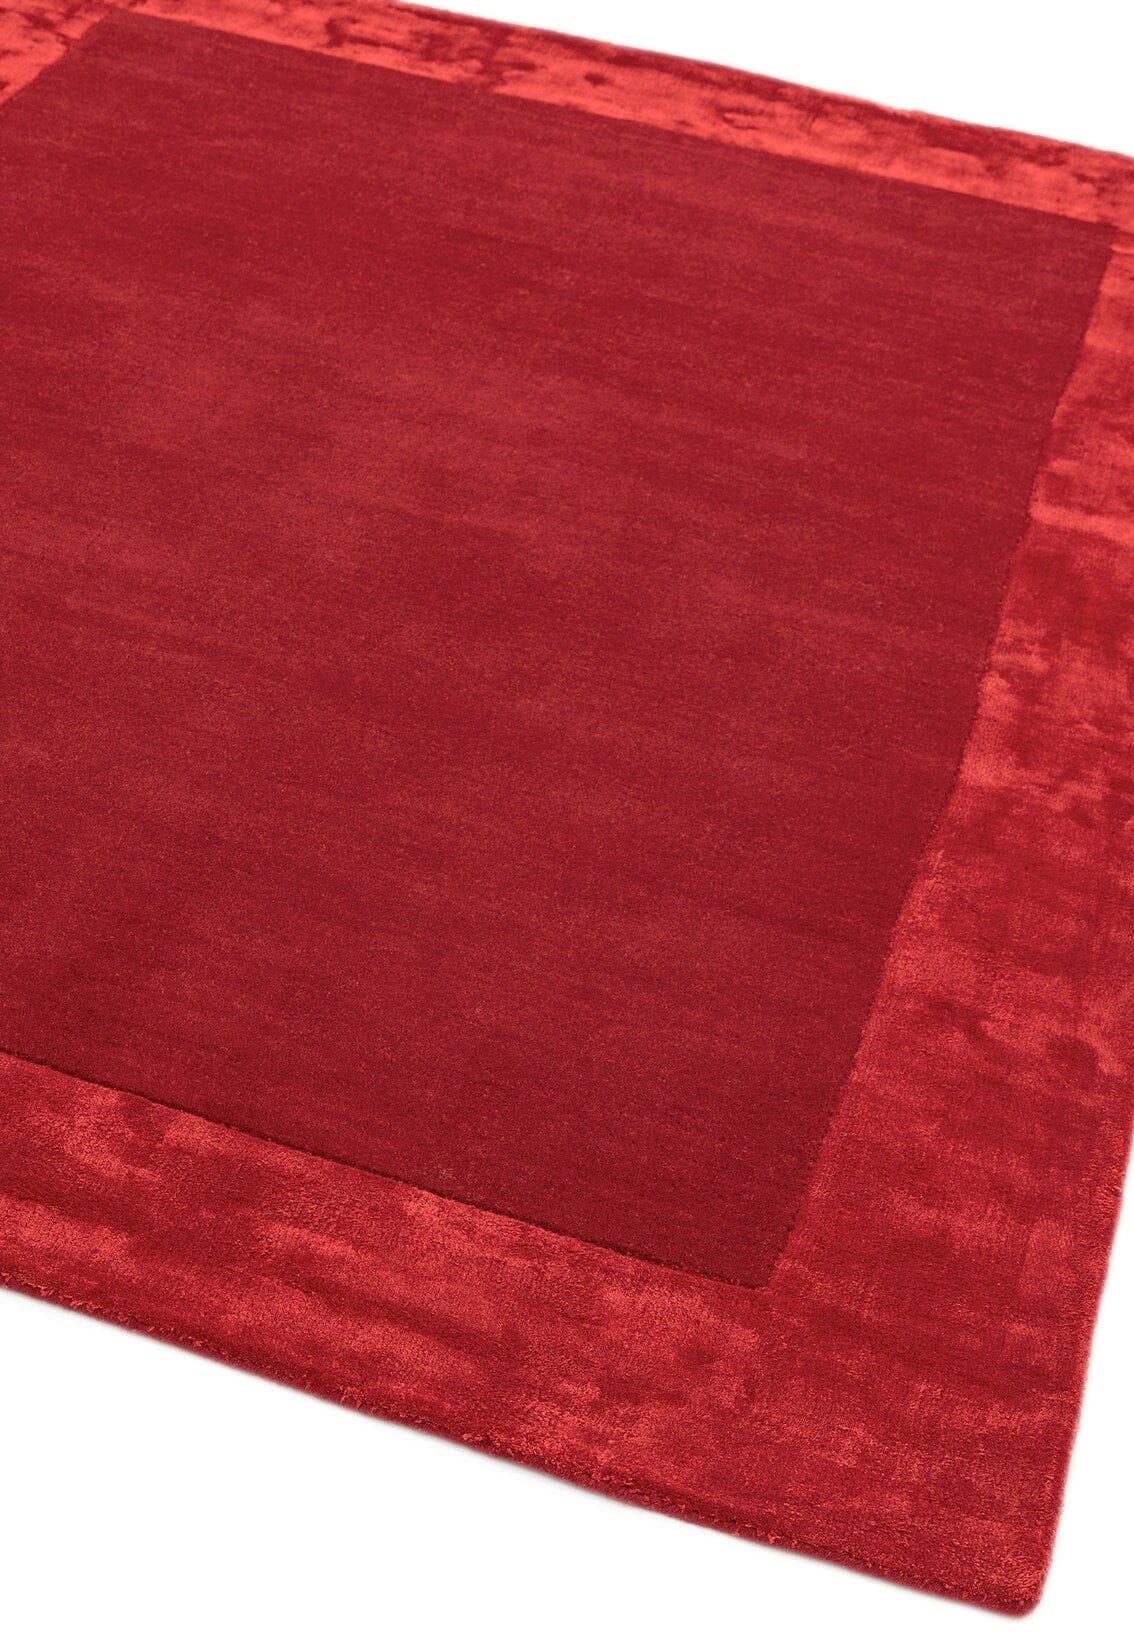  Asiatic Carpets-Asiatic Carpets Ascot Hand Woven Rug Red - 80 x 150cm-Red 277 